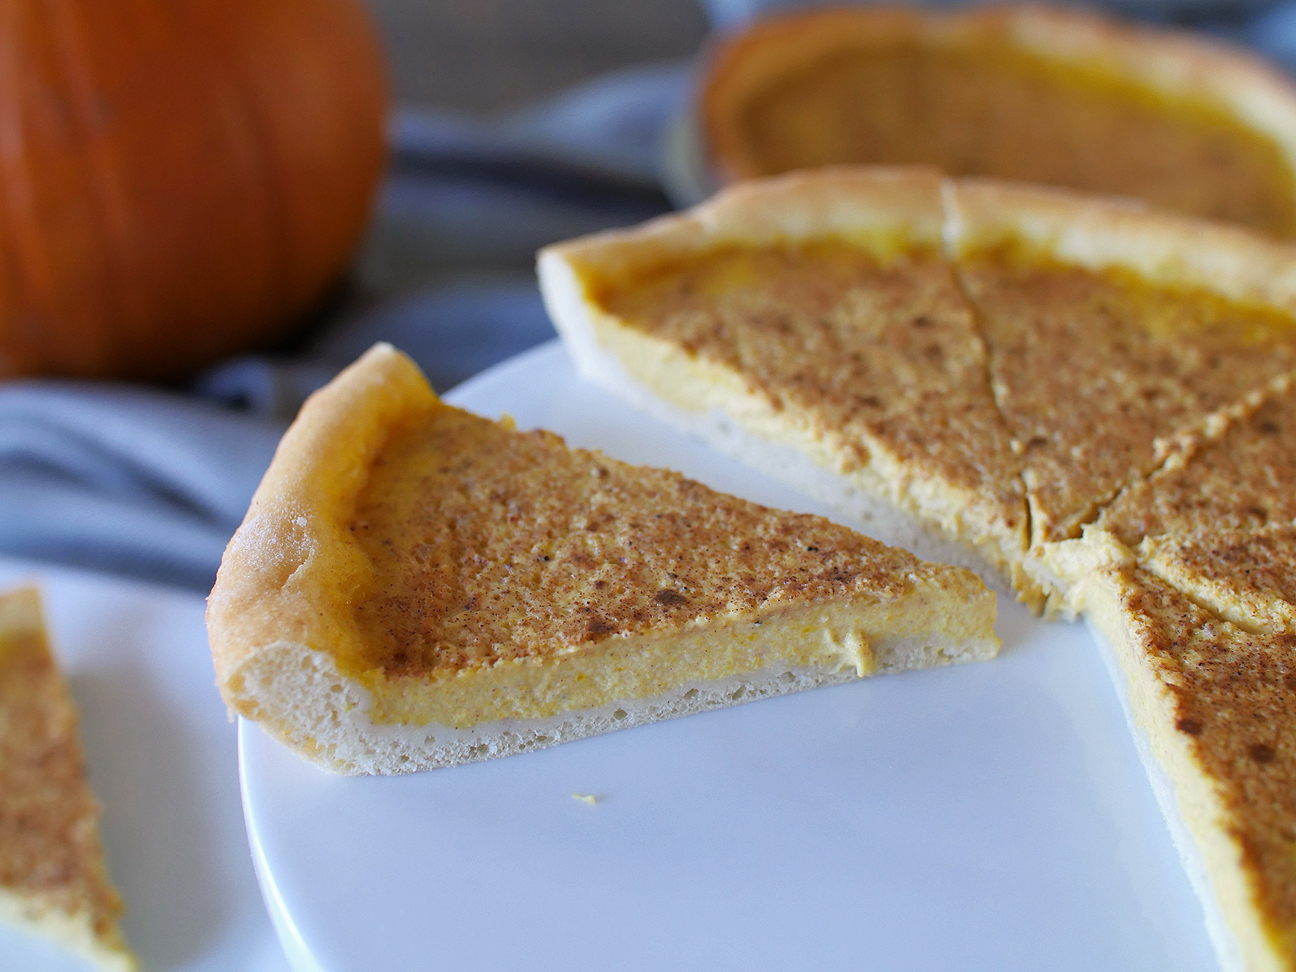 Pumpkin Küchen | Milk & Cereal | You know pumpkin is not just for Thanksgiving, so make this German custard dessert for Christmas! The crust is soft and puffy, and the custard is perfectly spiced. You and your family will LOVE it!